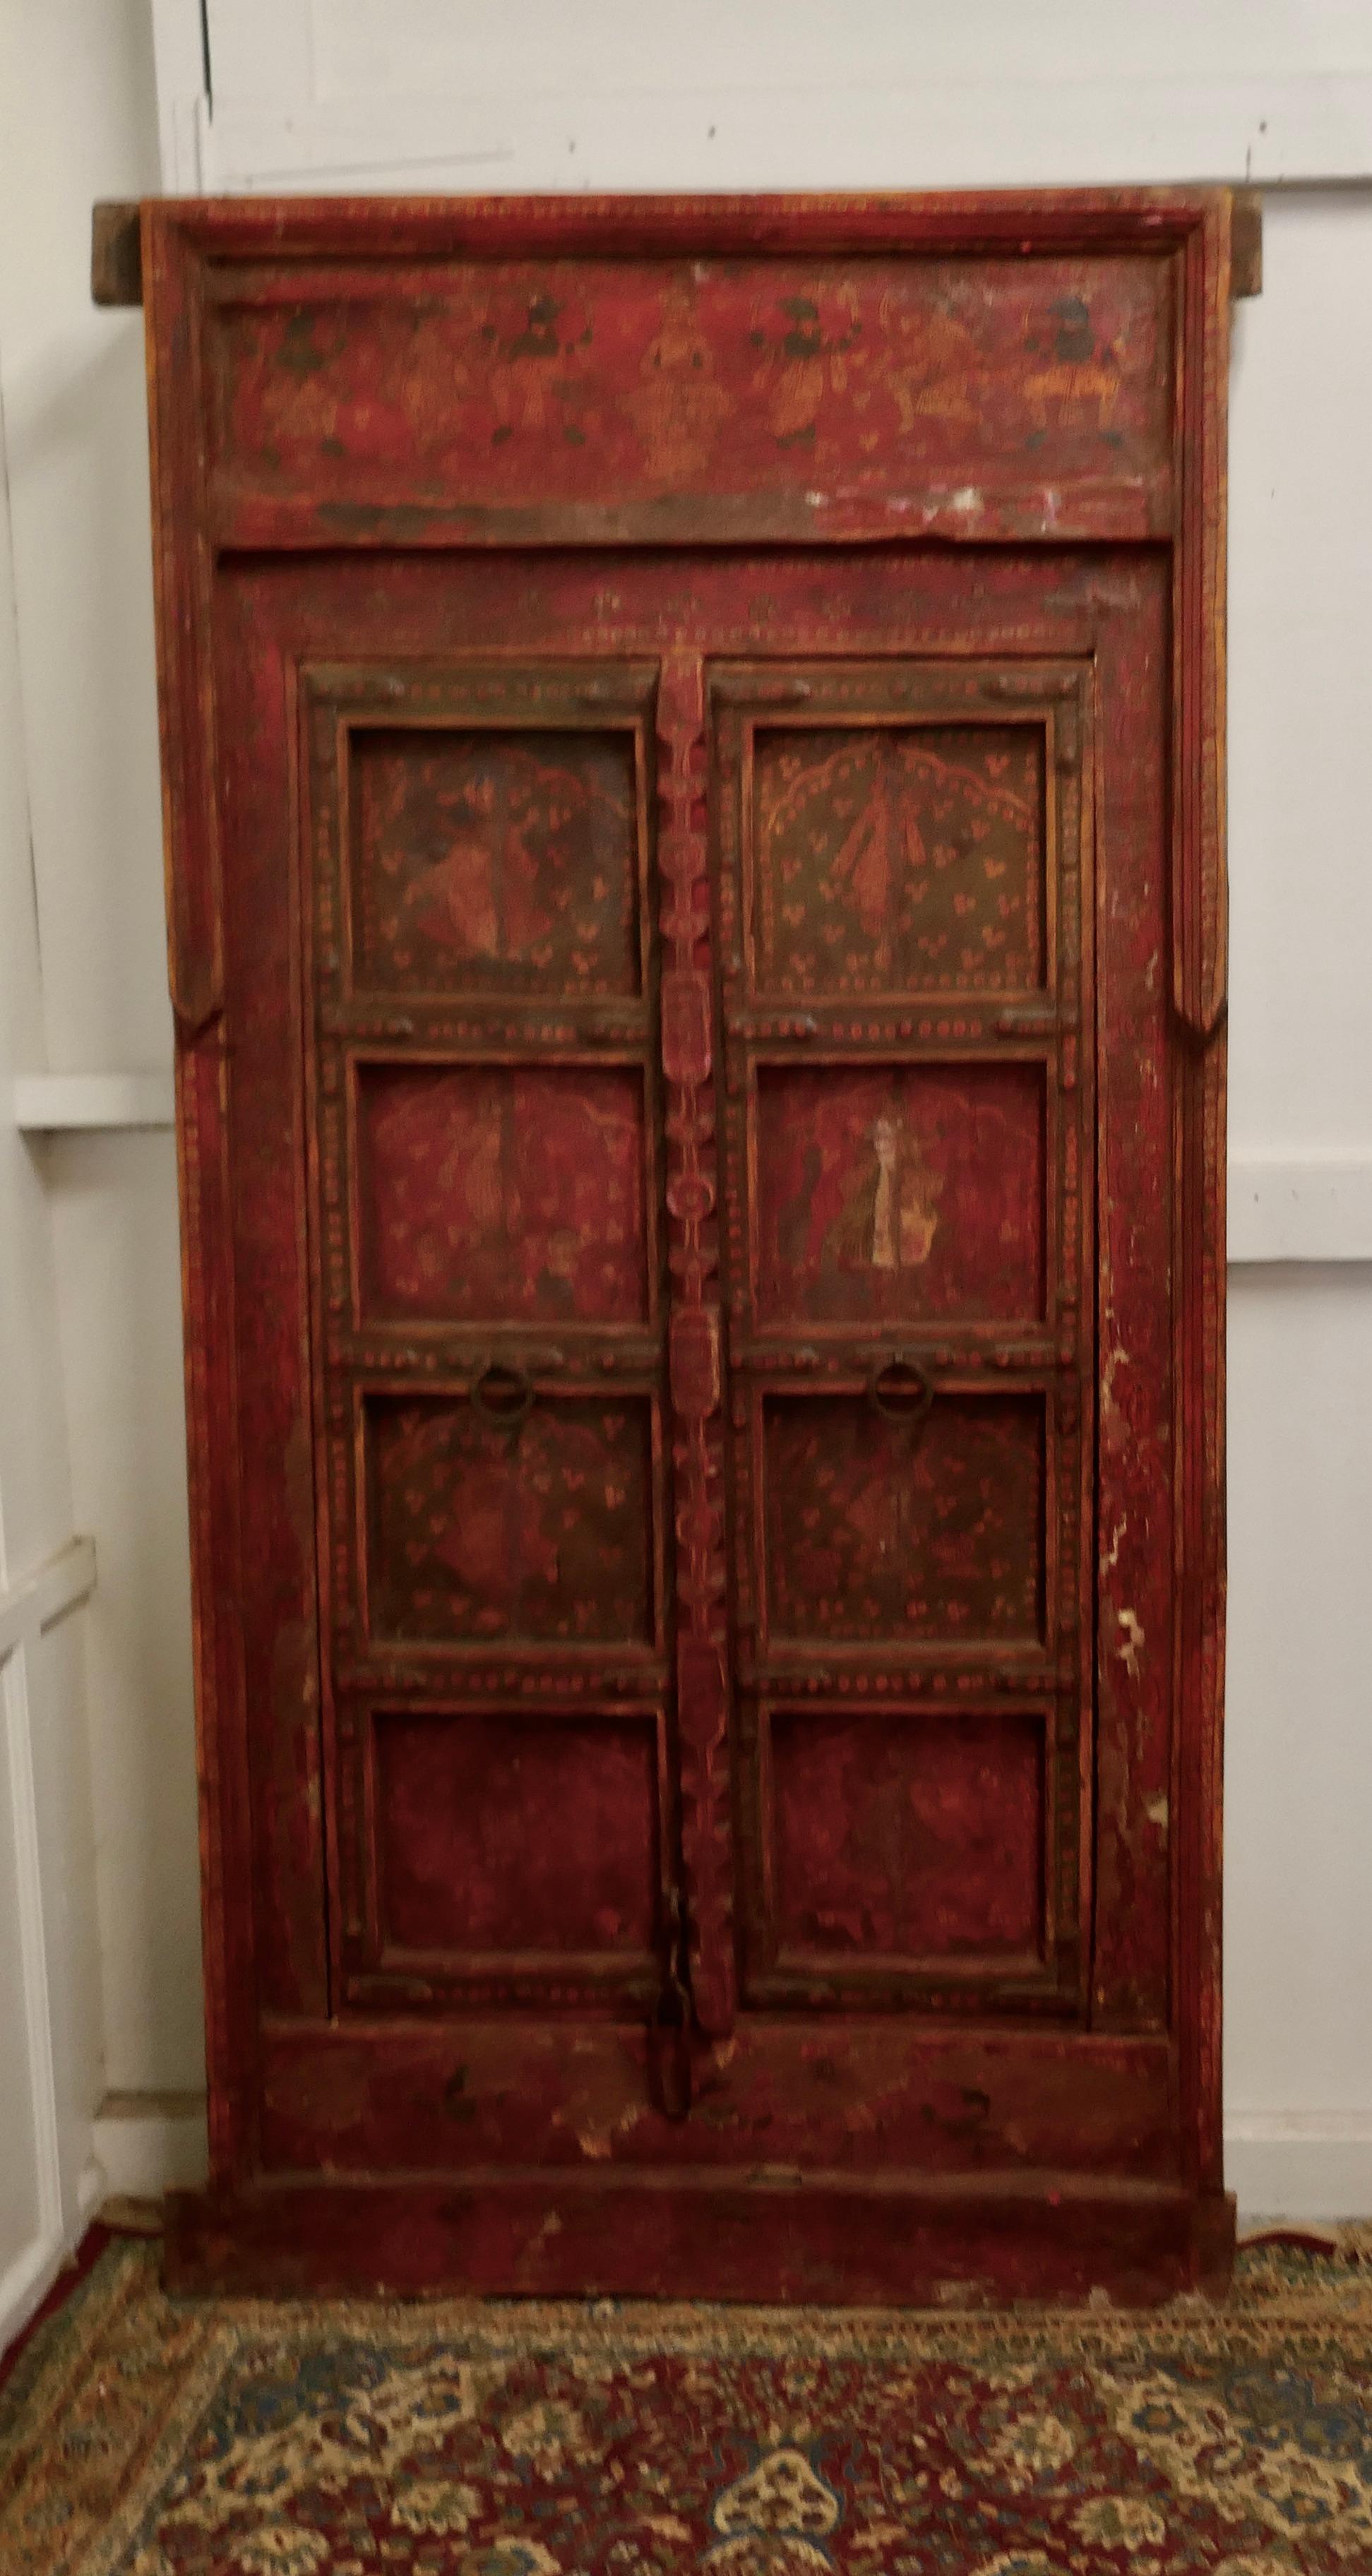 Anglo Indian painted doors in original frame, wall art

These beautiful wooden doors would look fabulous on a wall as decoration or relocated in a doorway
The panelled doors come in their original Carved Frame they have been fixed in the closed